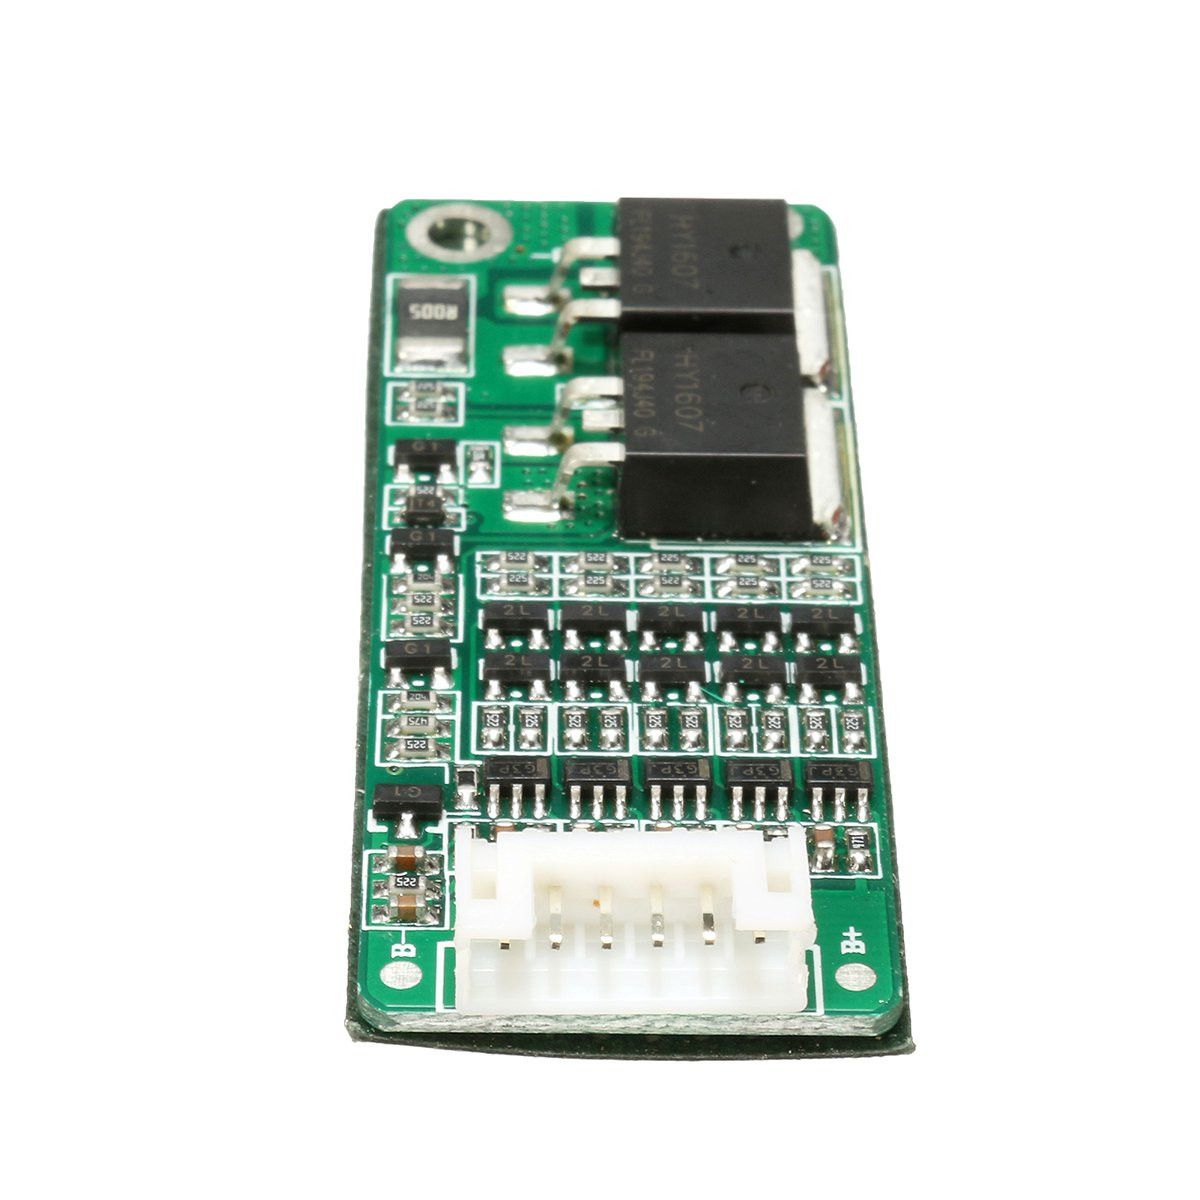 5S-Lithium-Battery-21V-18V-Protection-Board-Li-ion-Lithium-Battery-Cell-Module-1113030